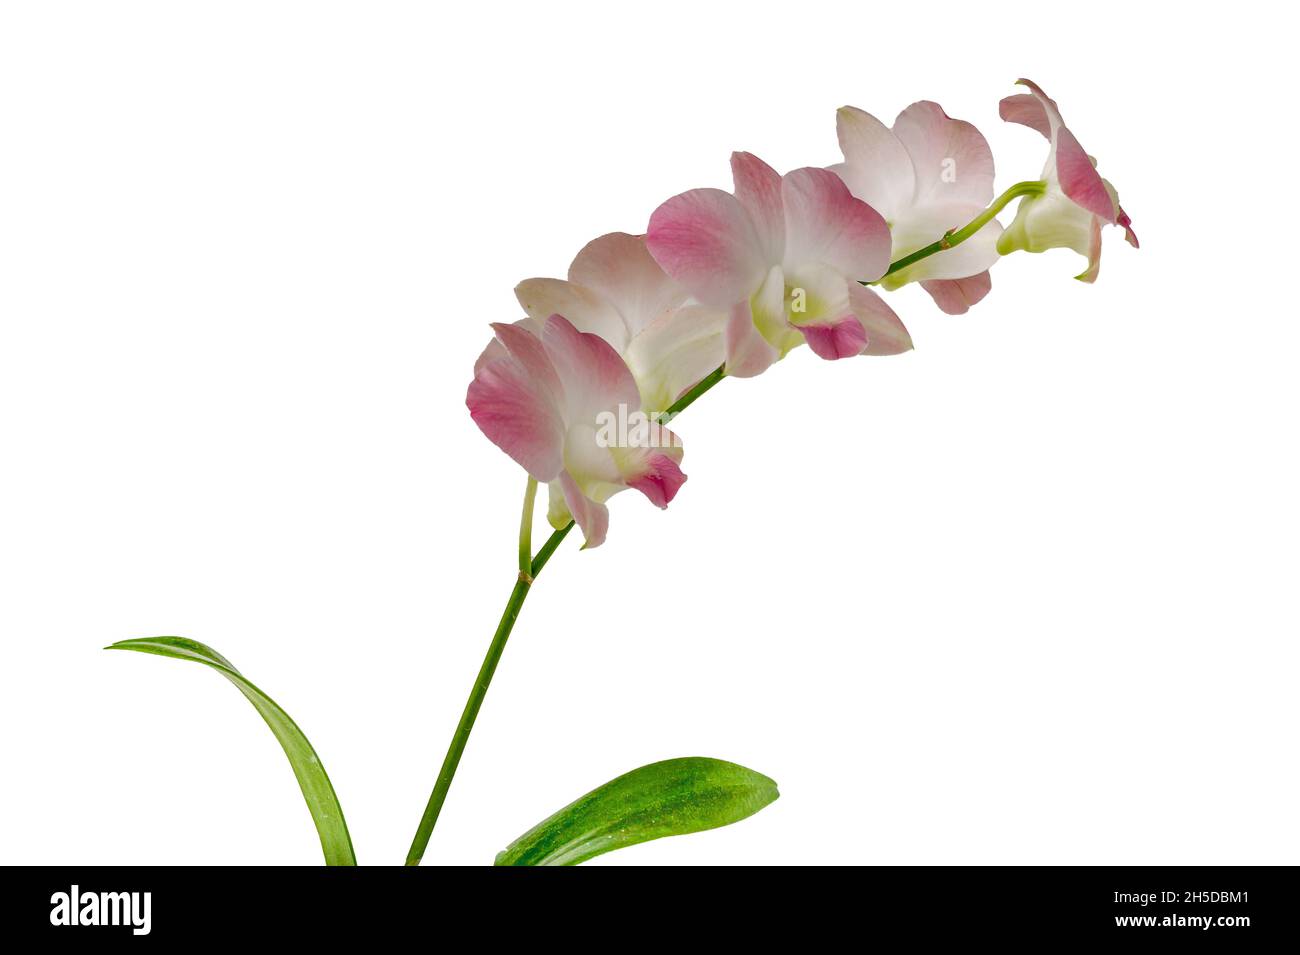 Orchids with dendrobium types have soft white and purple flowers, isolated on white background, copy space Stock Photo